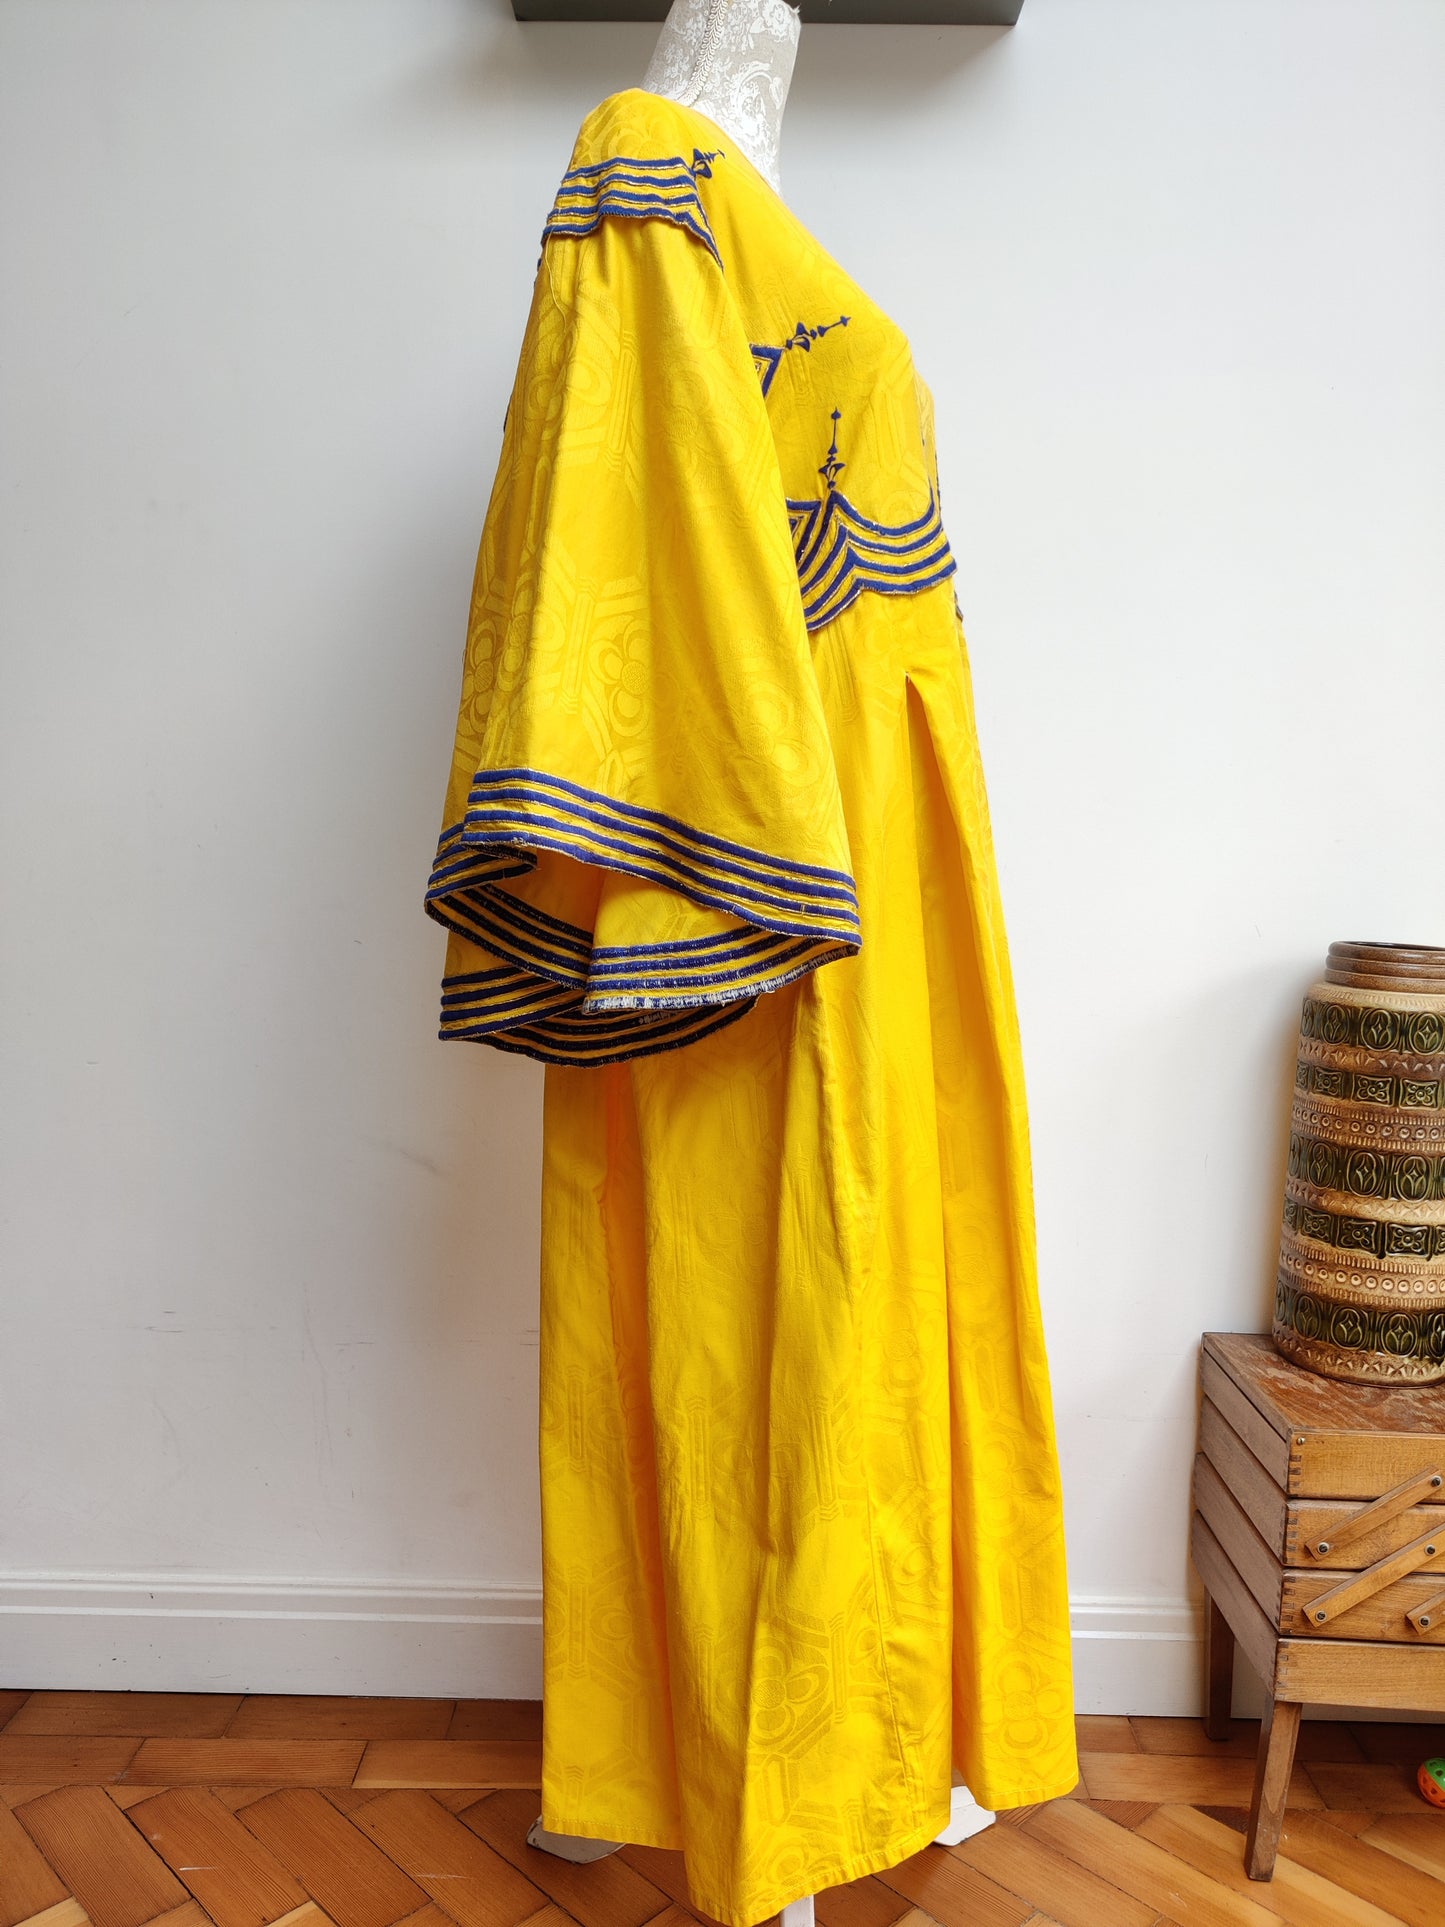 INcredible bright yellow vintage dress